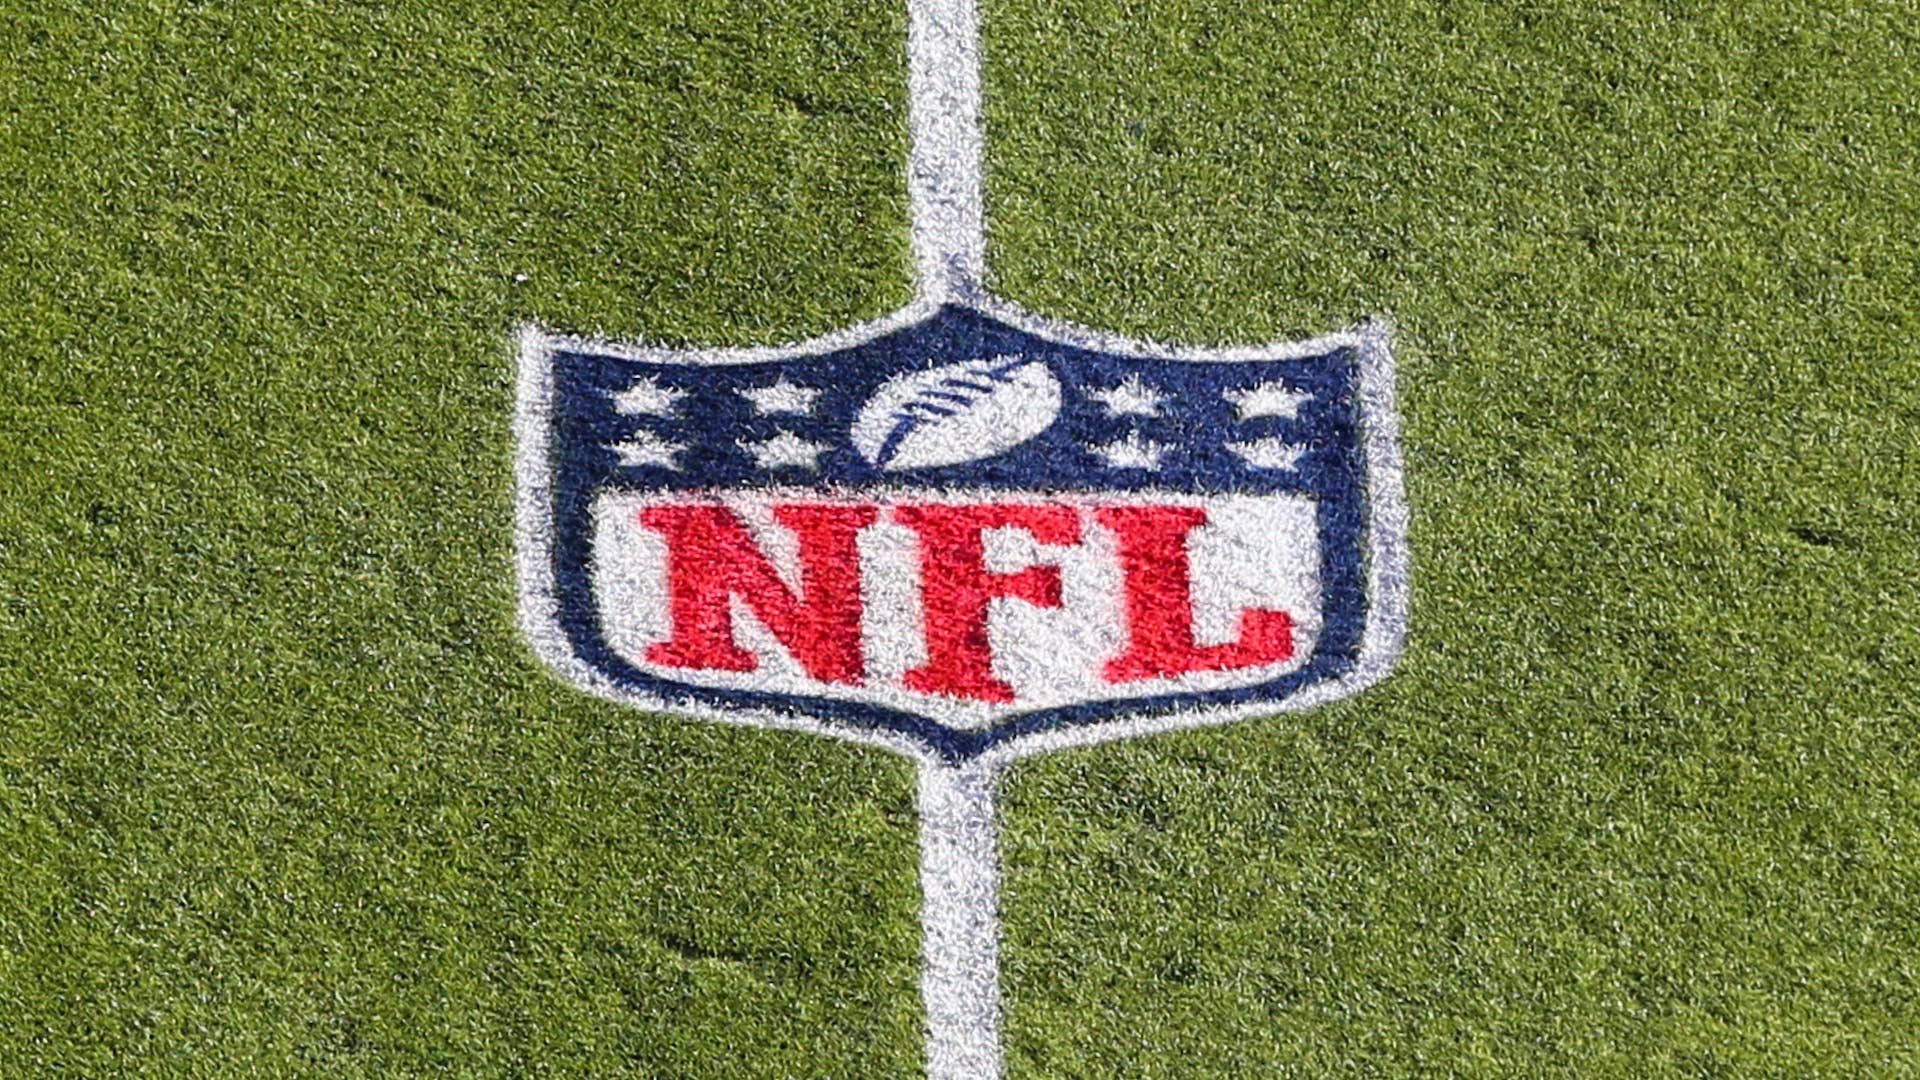 A view of the NFL logo on the field before a game